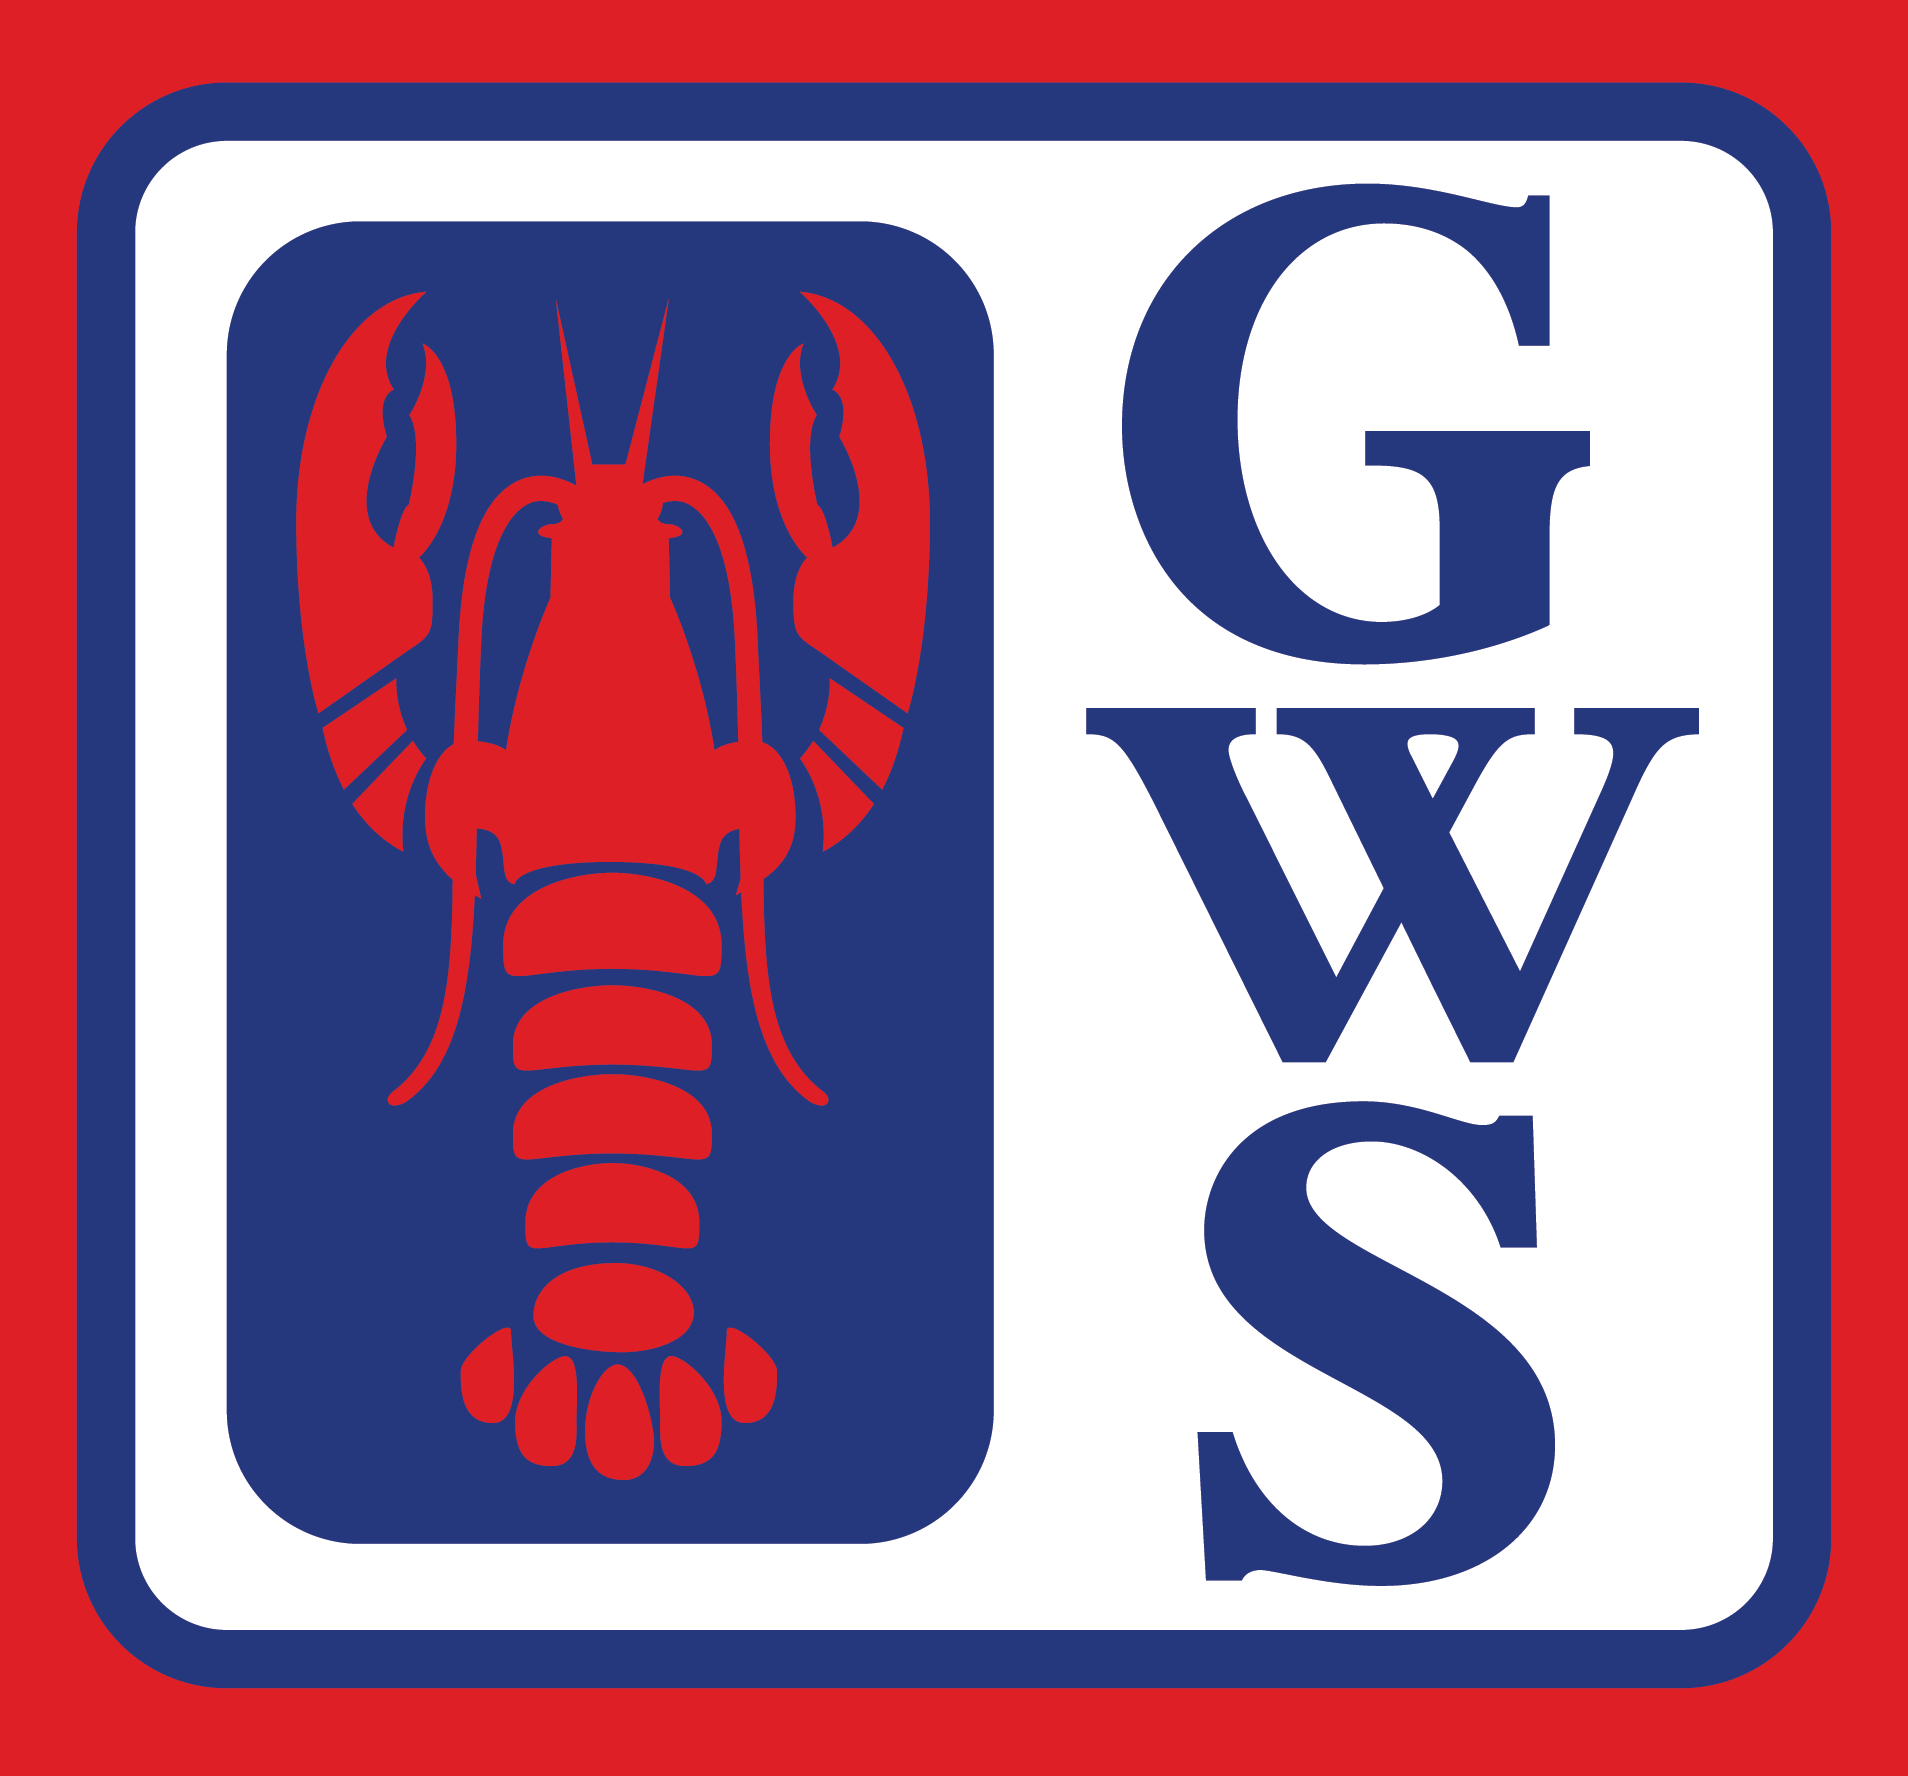 Red, white and blue Gardner's Wharf Seafood square logo with a red Lobster to the left and navy blue GWS positioned vertically to the right